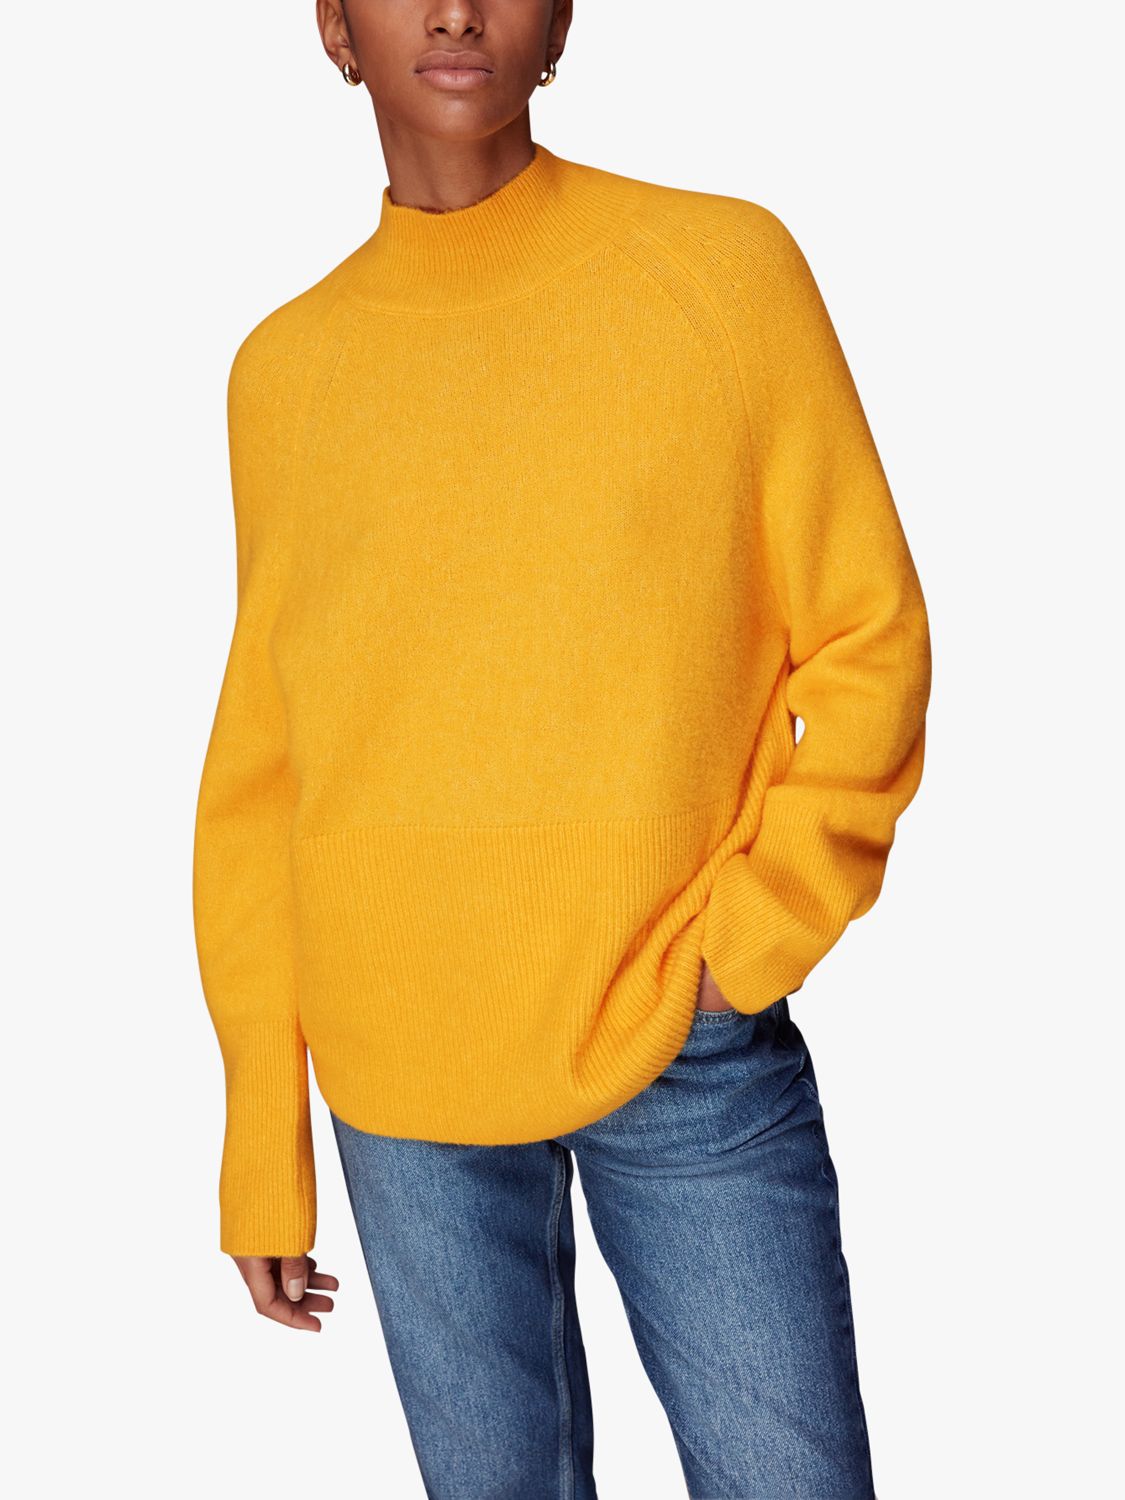 Whistles Oversize Funnel Neck Wool Blend Jumper, Yellow, M